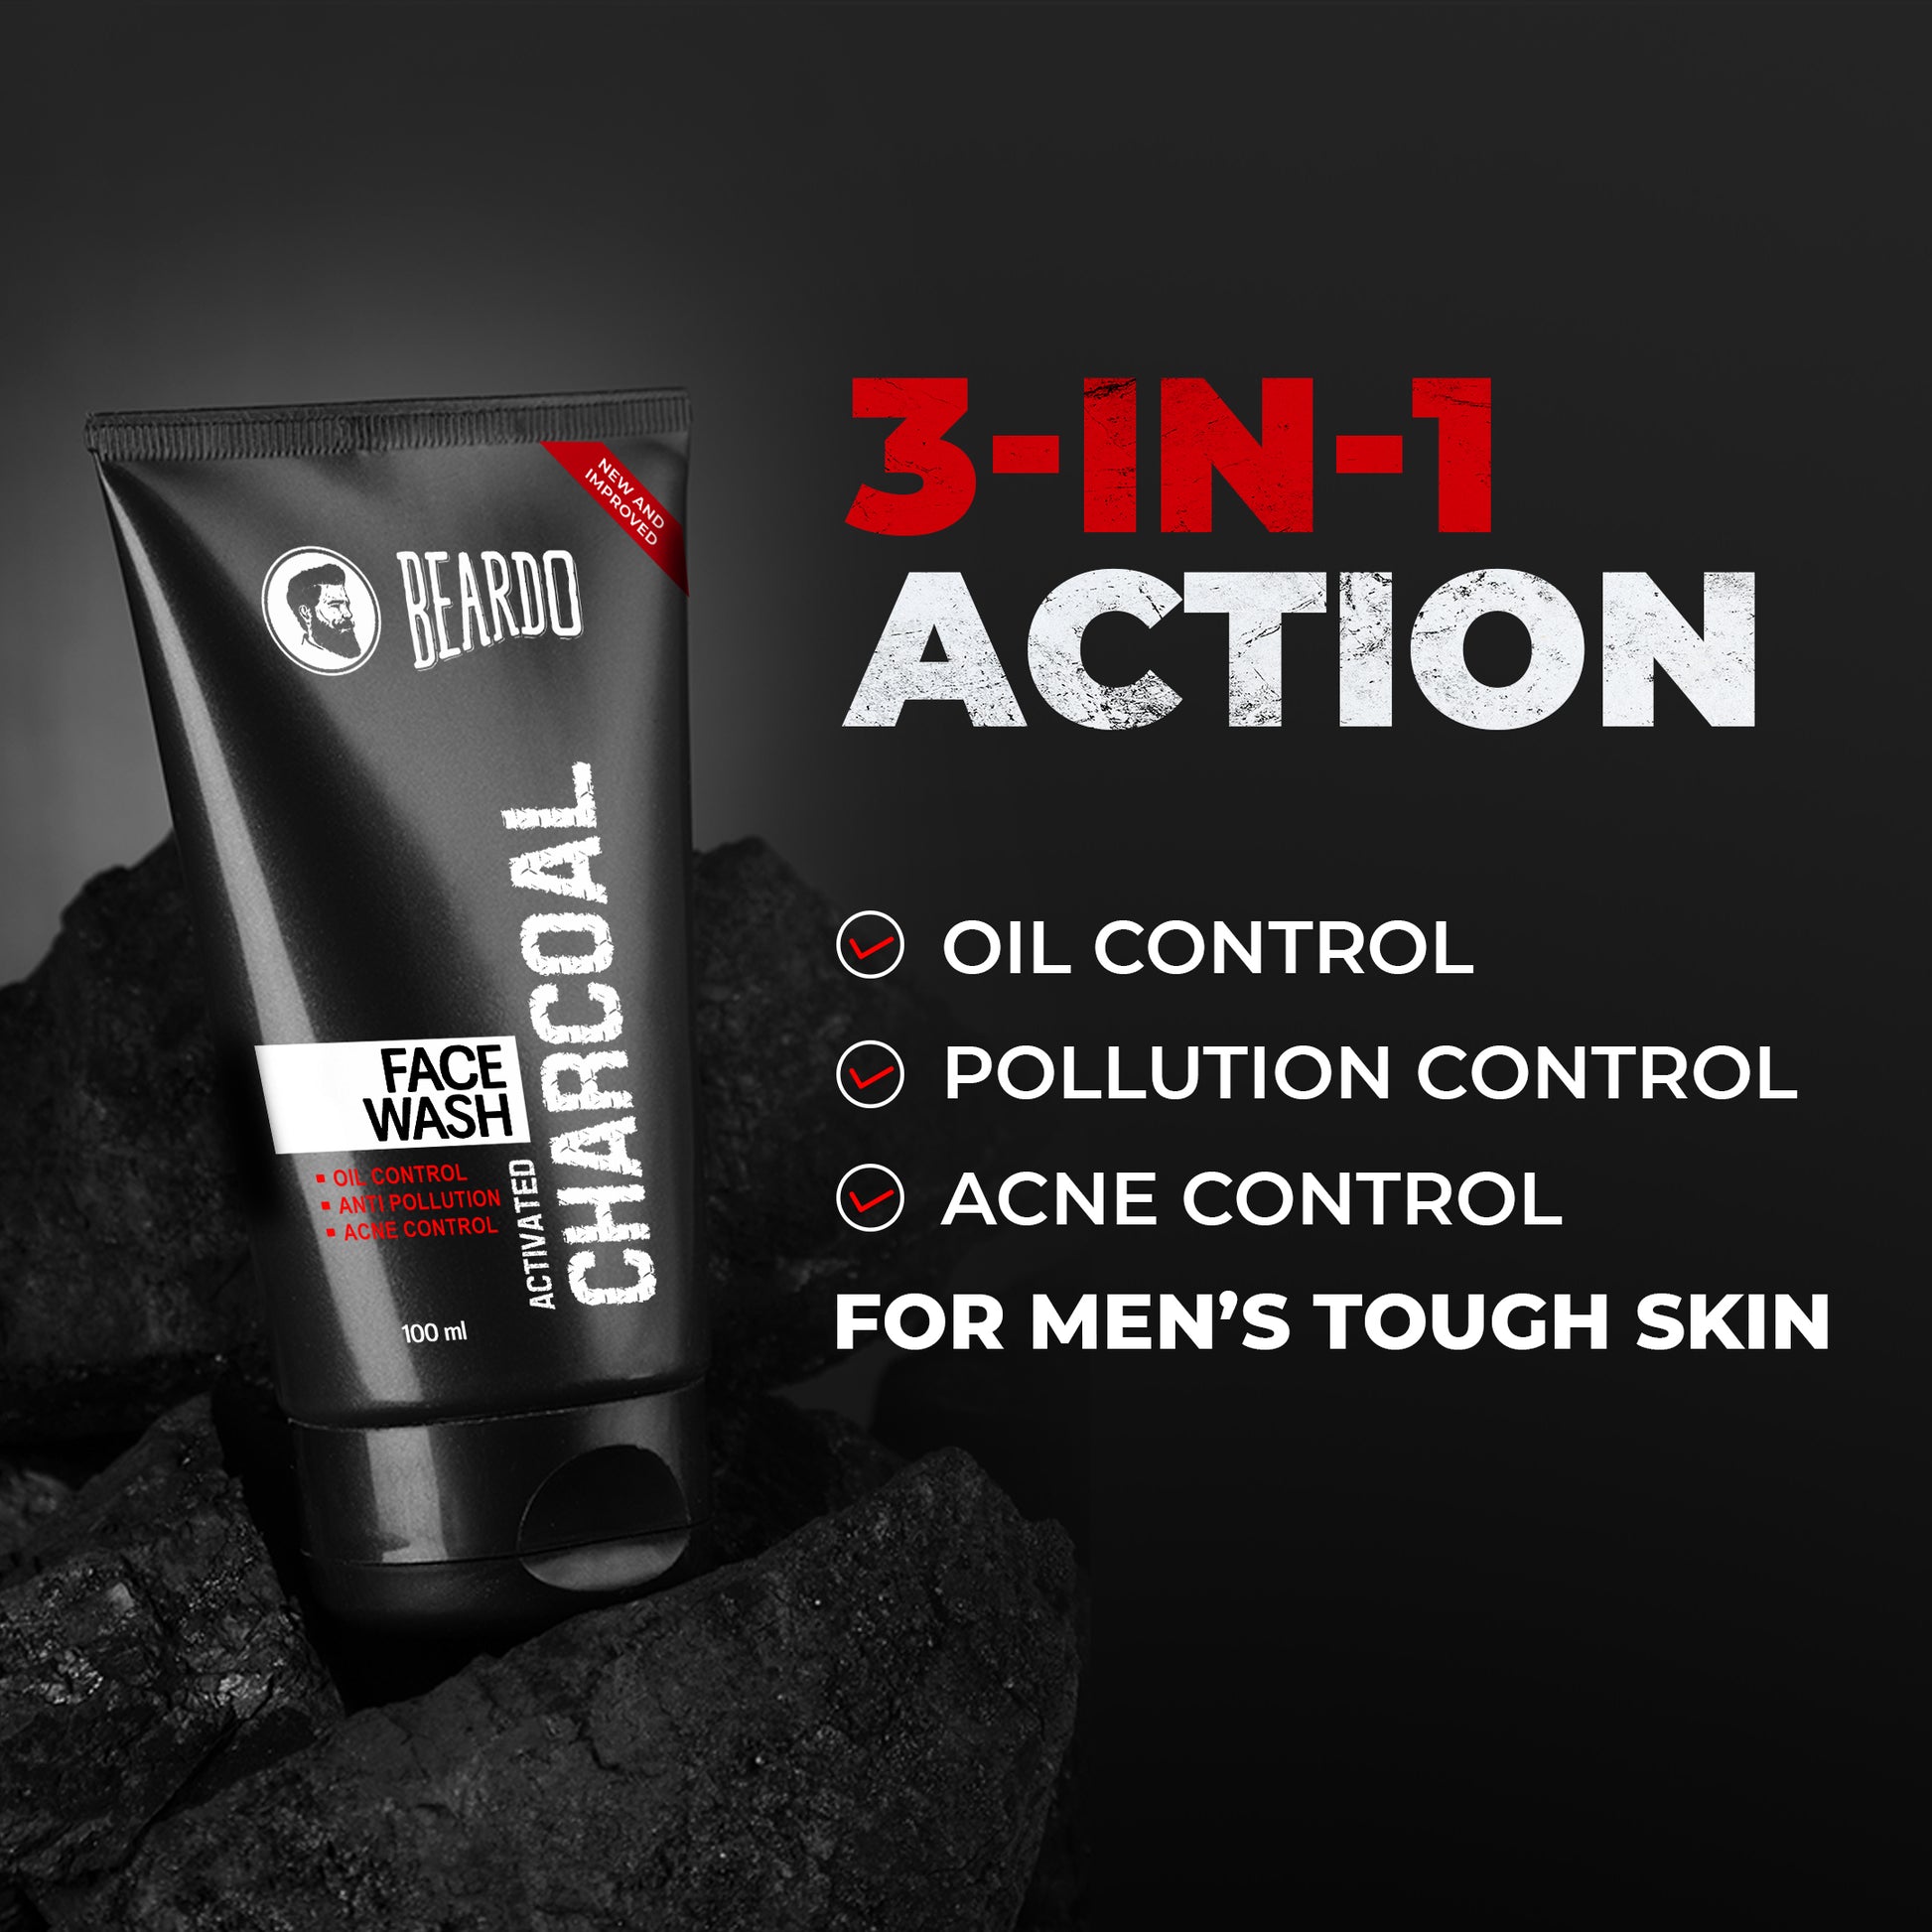 oil control, pollution control, acne control, 3 in 1 action